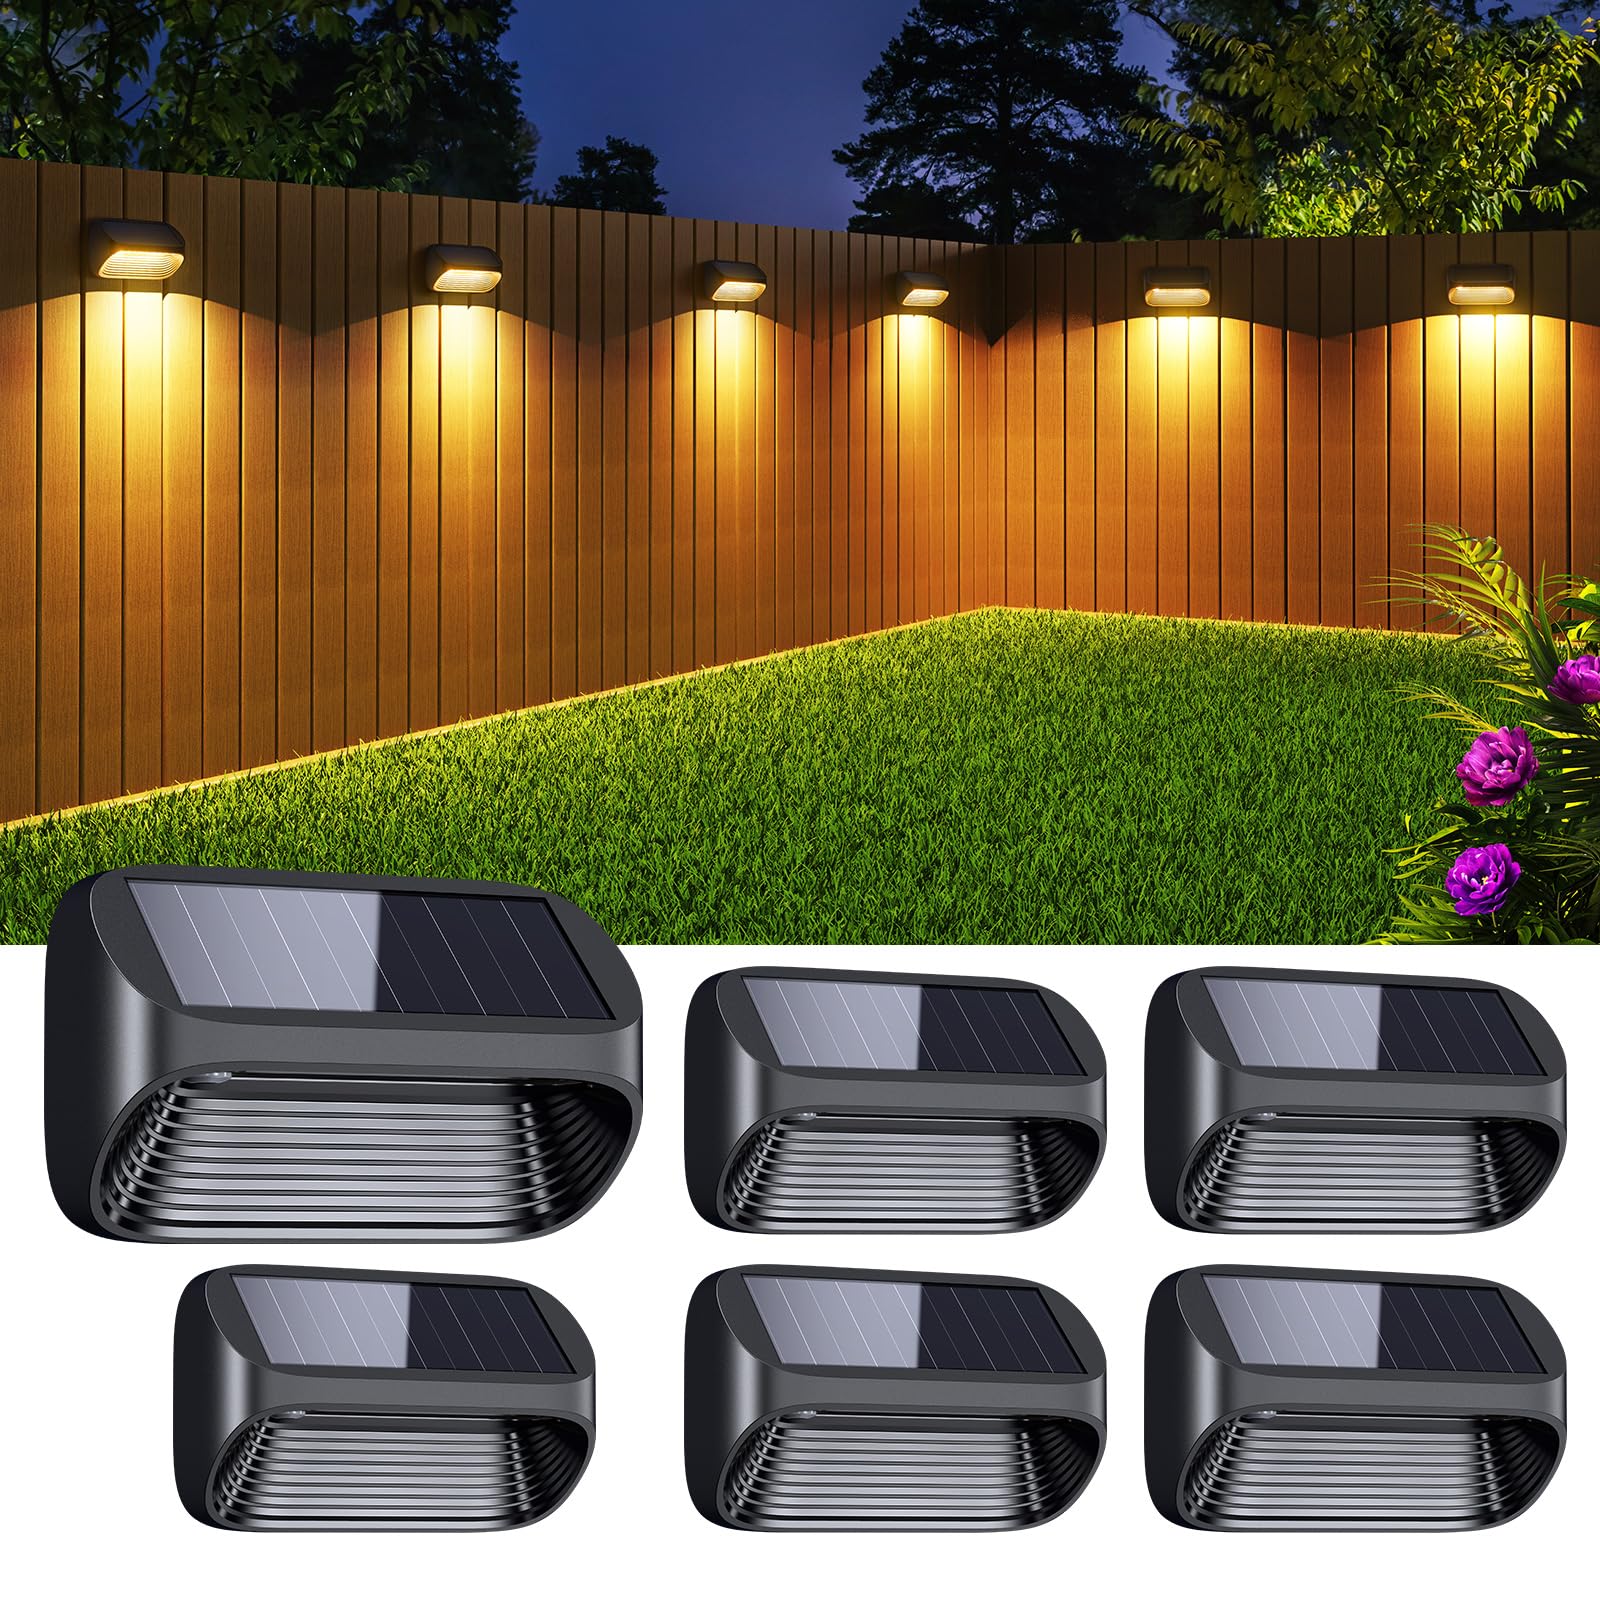 LETMY Solar Fence Lights Outdoor, 6 Pack Solar Deck Lights Outdoor Waterproof with 3 Modes, Auto On/Off Outdoor Solar Step Lights $16.49